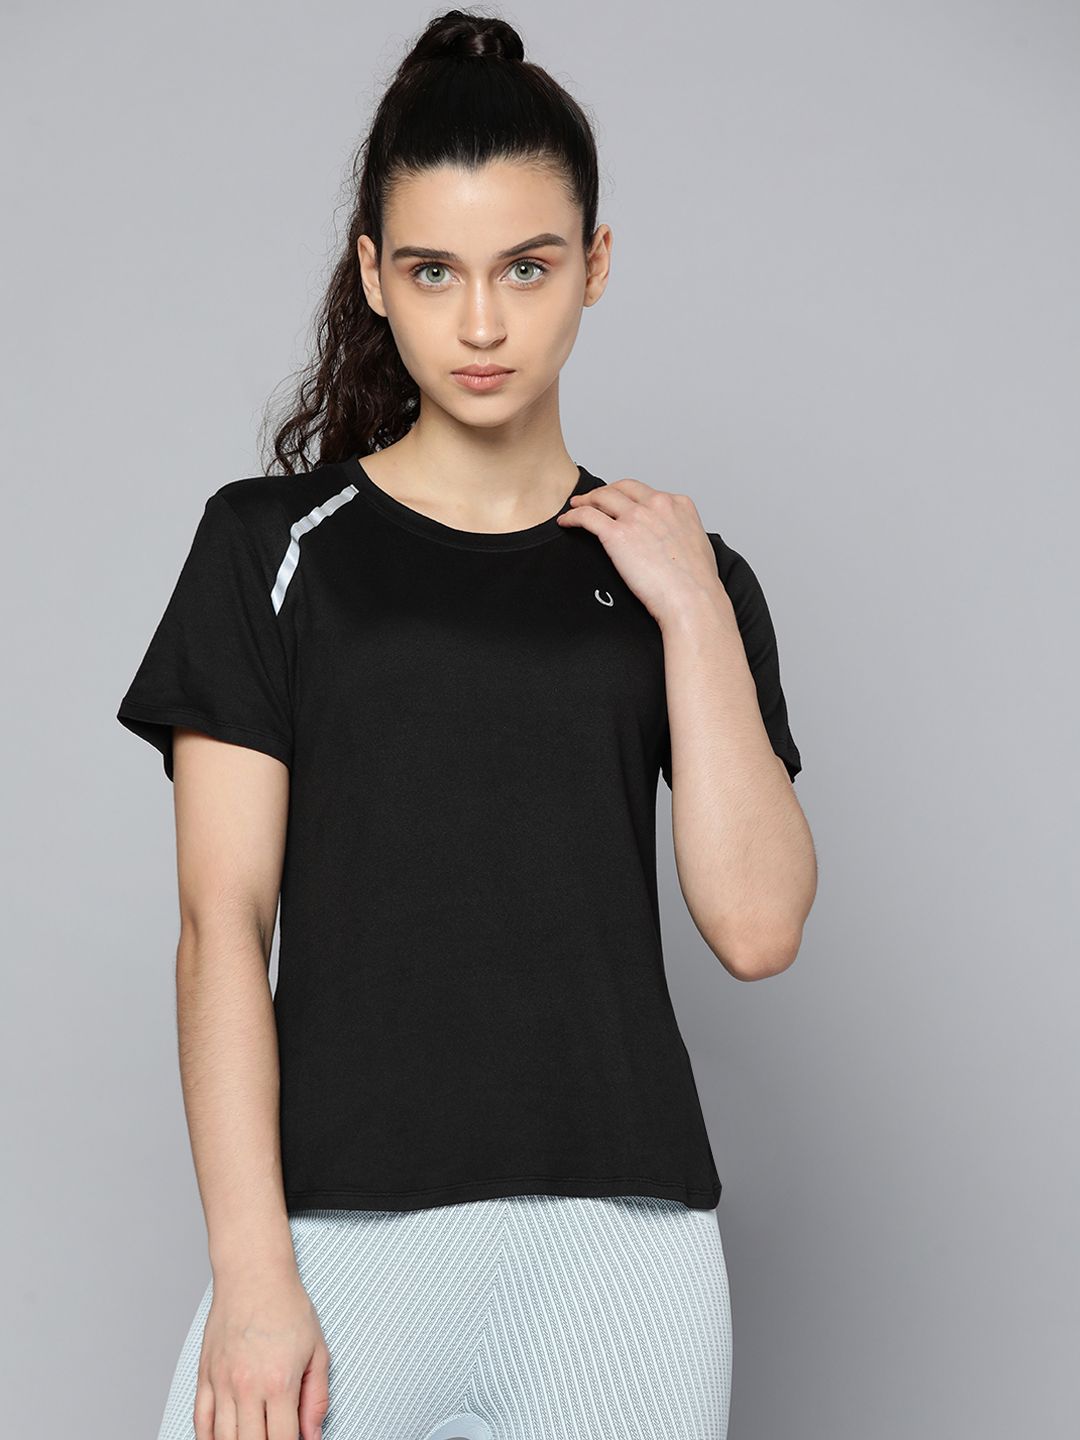 Fitkin Women Black Solid T-shirt Price in India